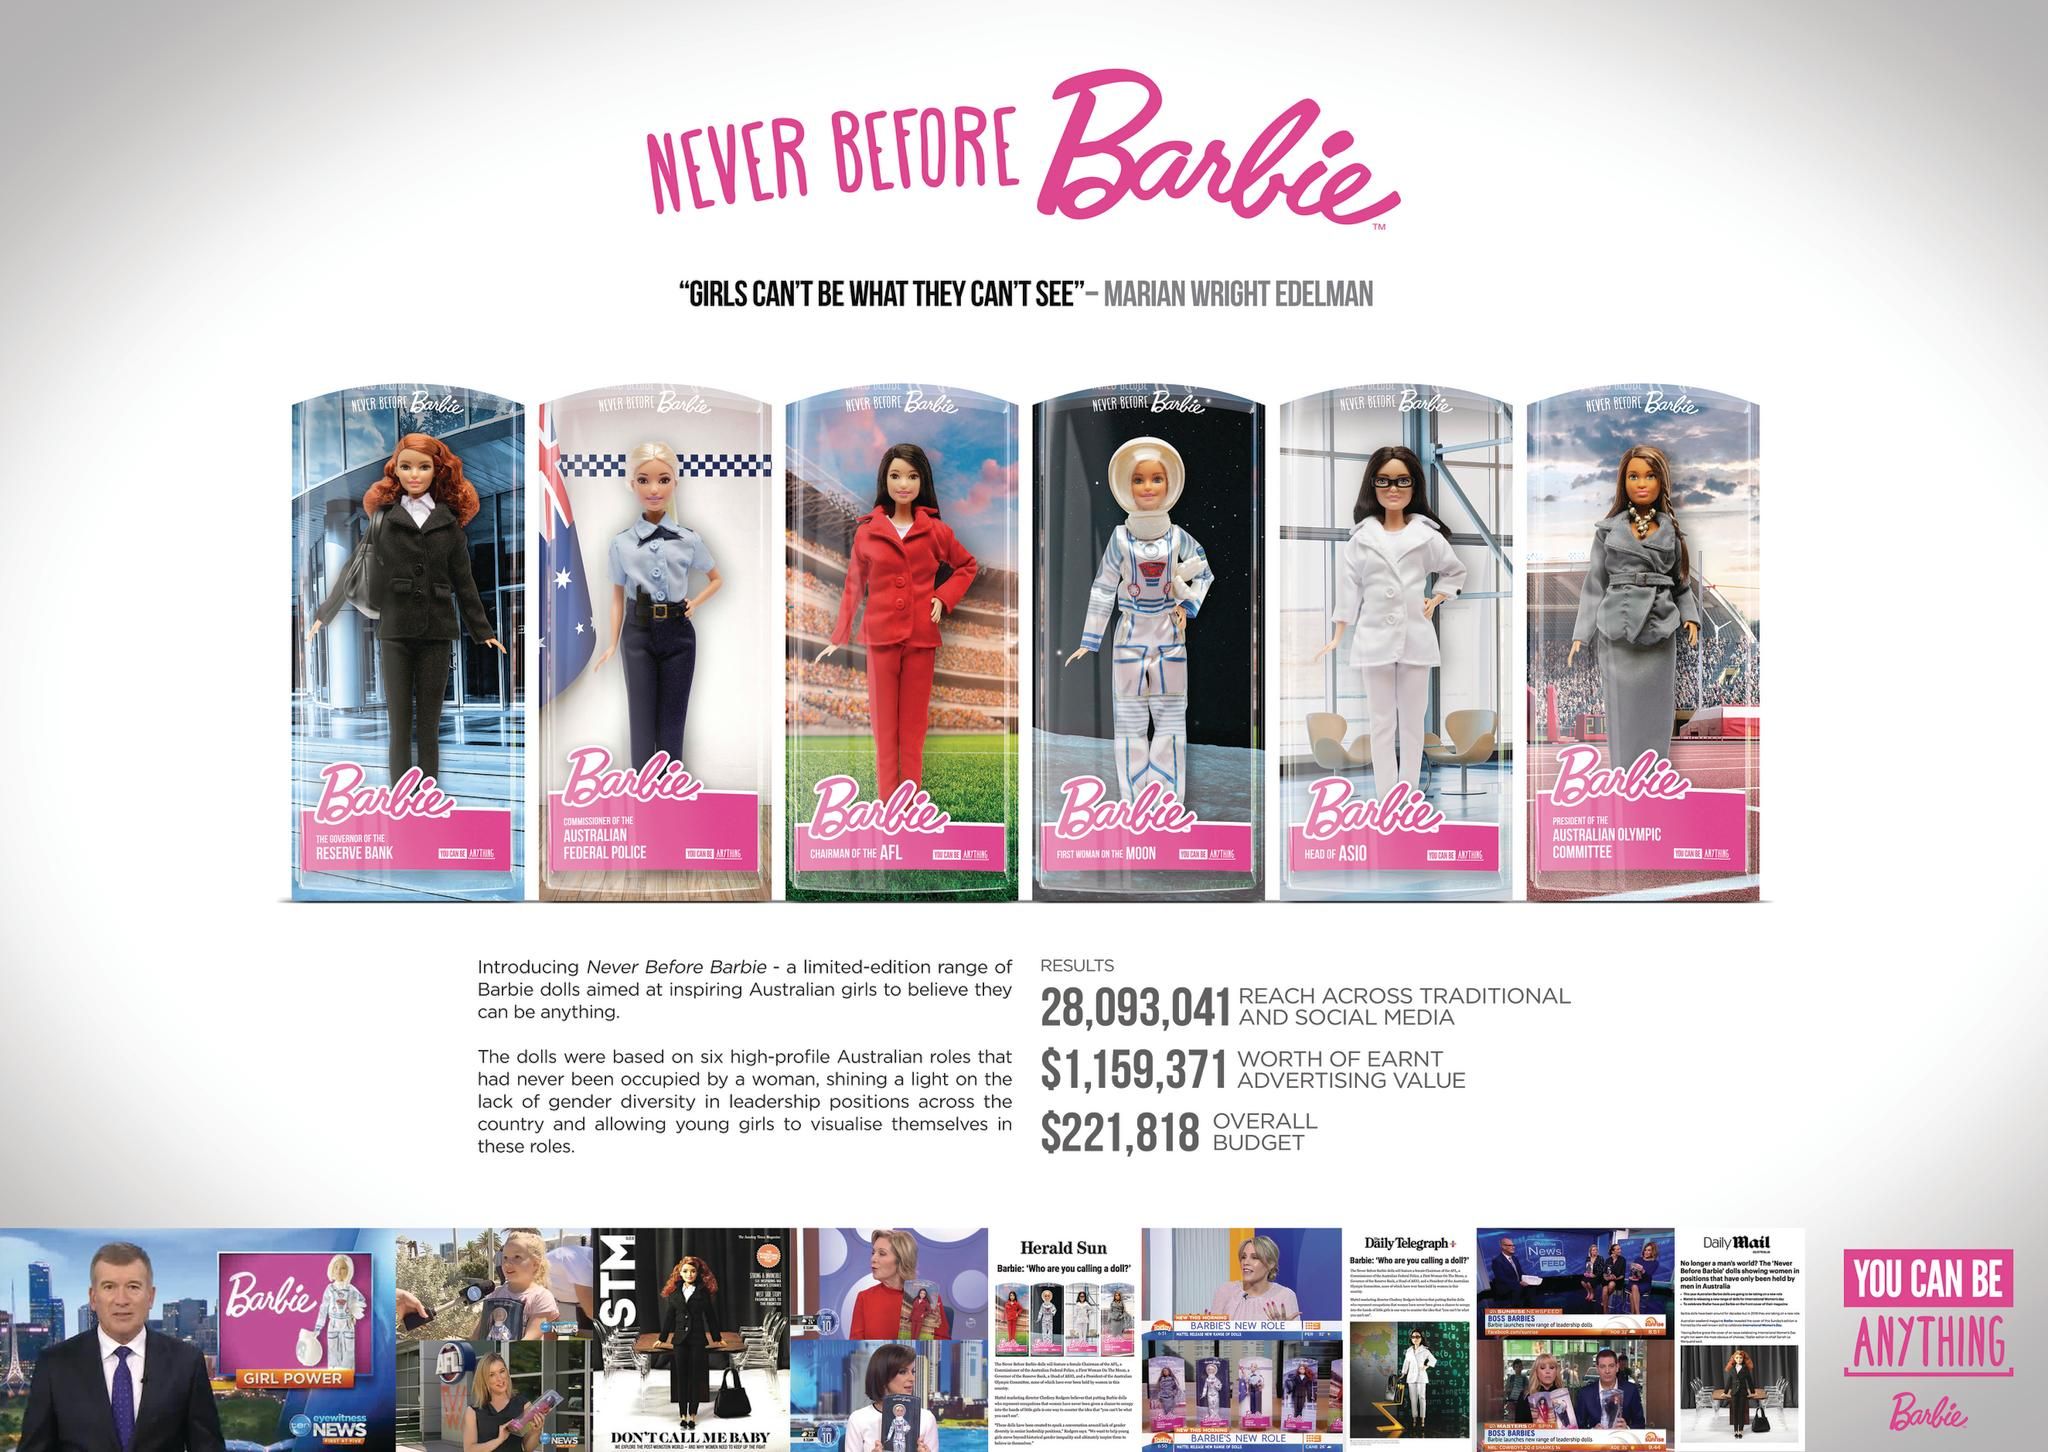 BARBIE - Never Before Barbie - BBDO - Cannes Lions 2018 (Presentation Image from The Work - 415804-5041486)